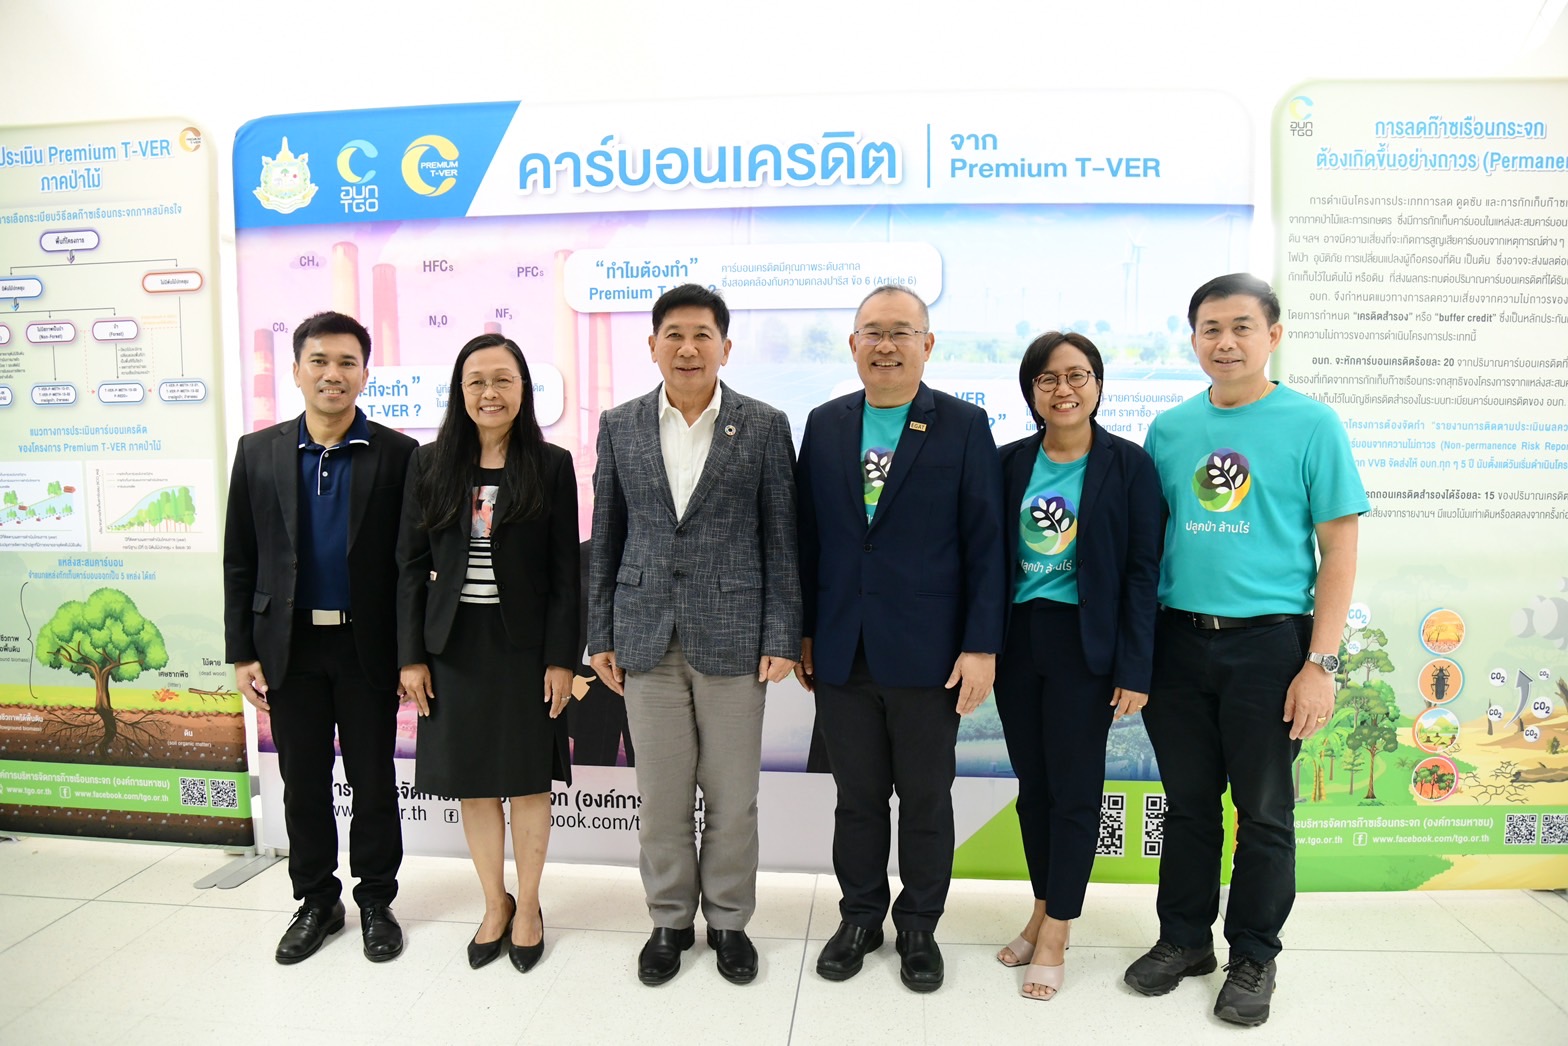 TGO, EGAT, and partners present first Premium T-VER model of forest sector in Thailand